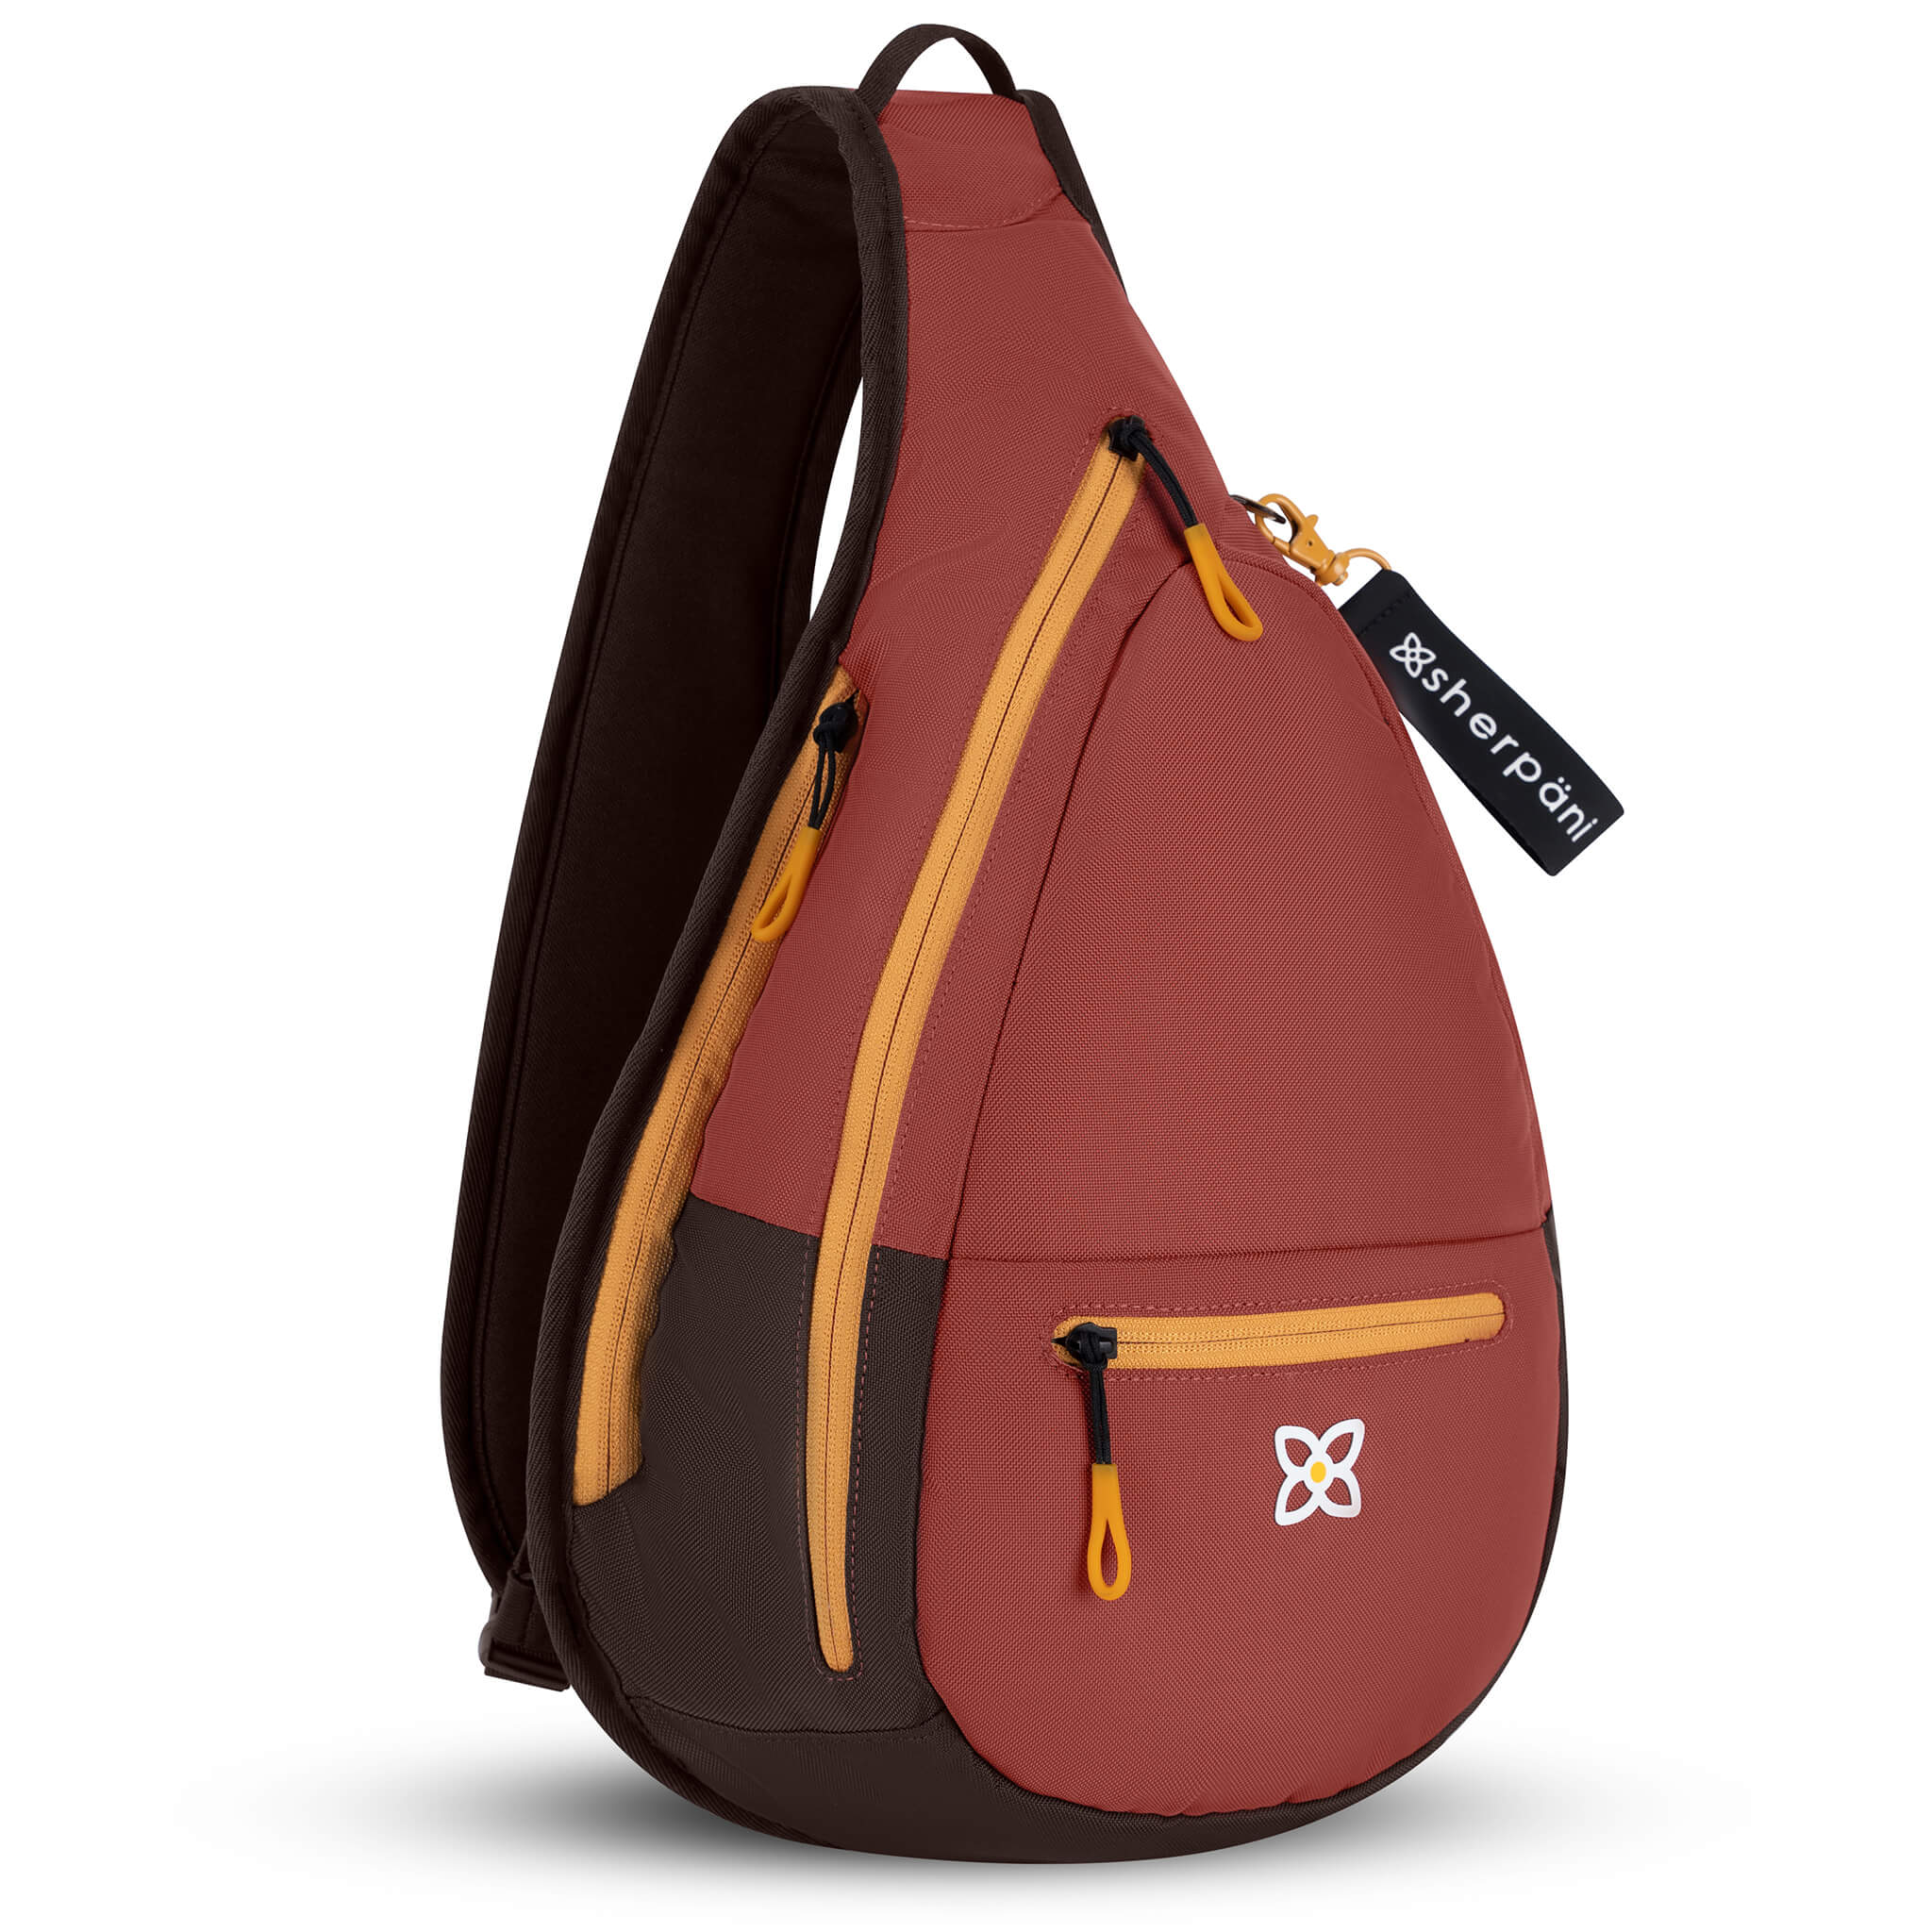 Angled front view of Sherpani sling backpack for women, the Esprit in Cider. Esprit features include front zipper pocket, side zipper pocket, inside mesh pocket, RFID blocking, detachable key chain and an adjustable sling strap. The Cider color is two-toned in burgundy and dark brown with yellow accents.